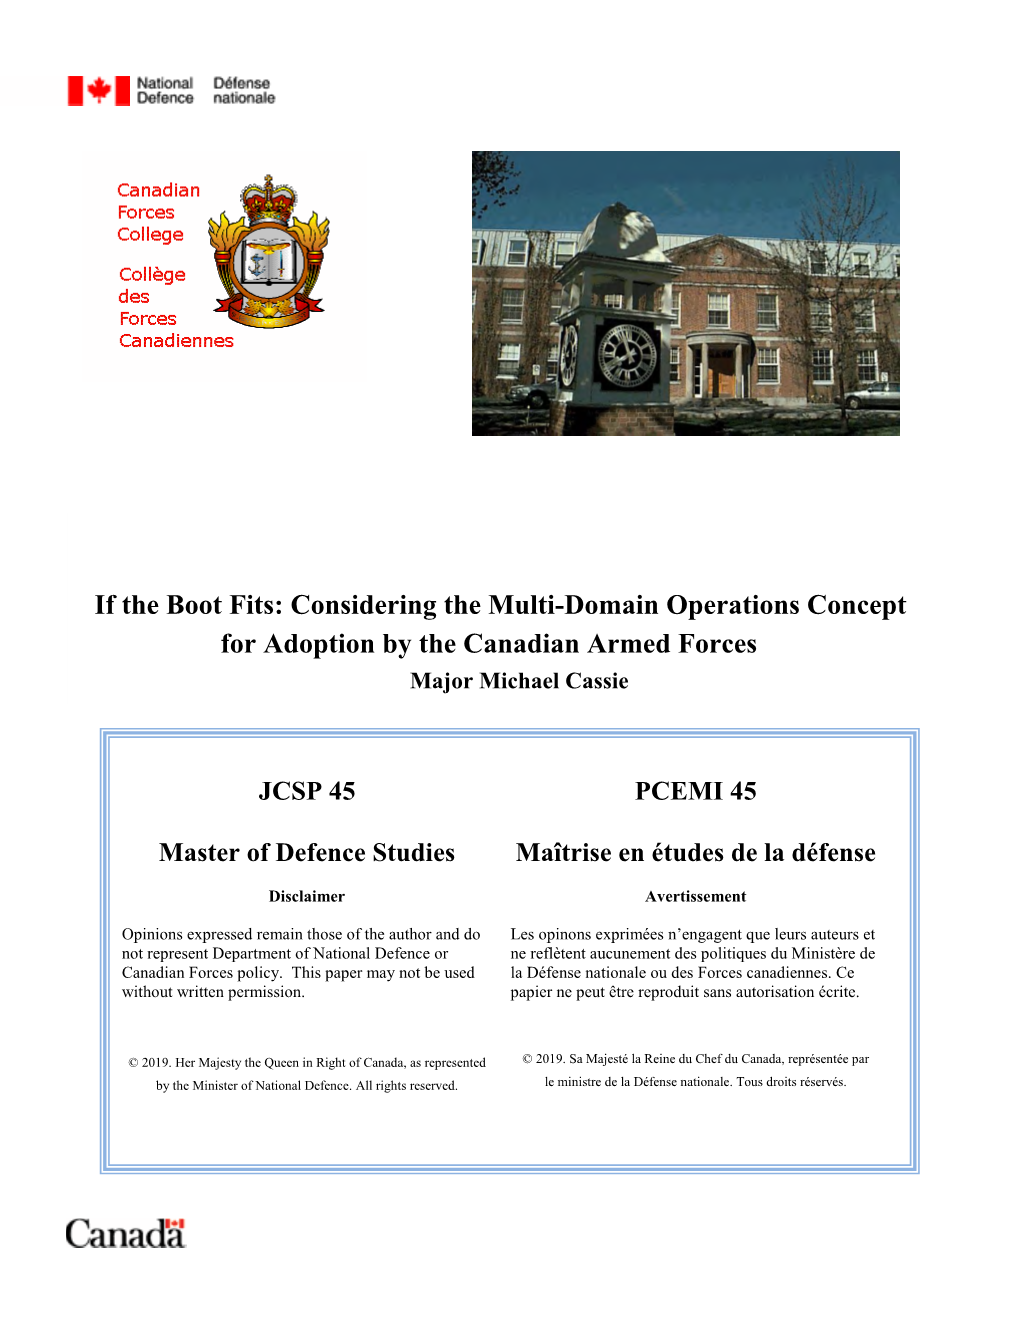 If the Boot Fits: Considering the Multi-Domain Operations Concept for Adoption by the Canadian Armed Forces Major Michael Cassie